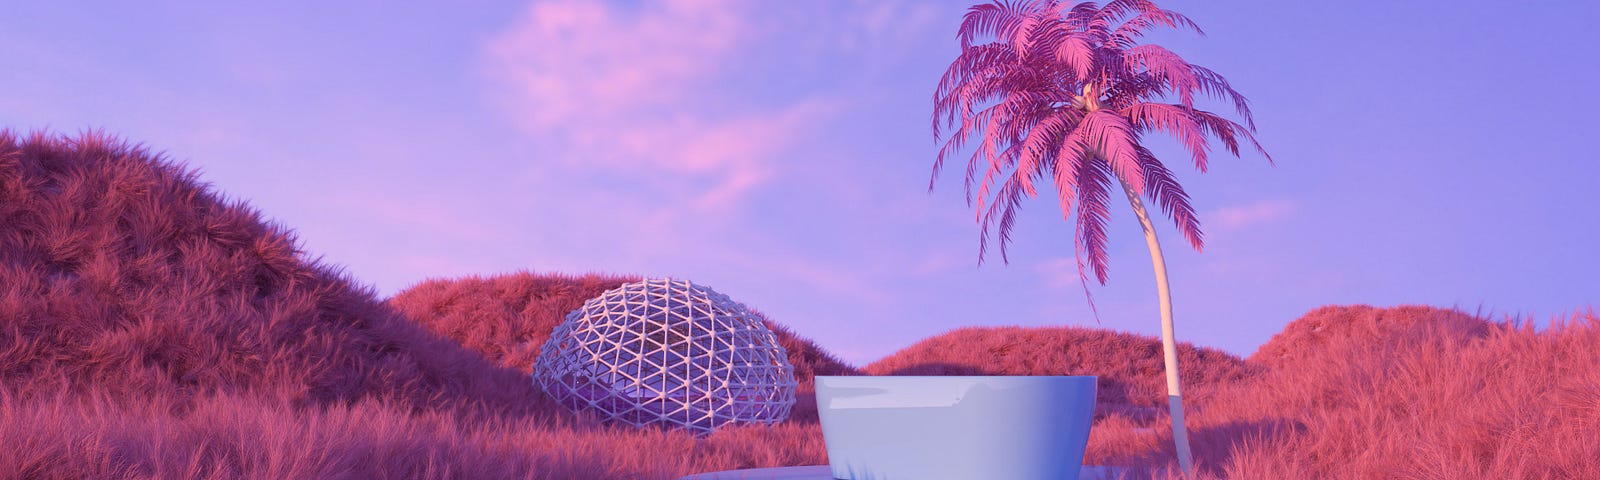 Virtual scene with a geometric dome in the background, a palm tree, and a bathtub in the middle of a hilly field.